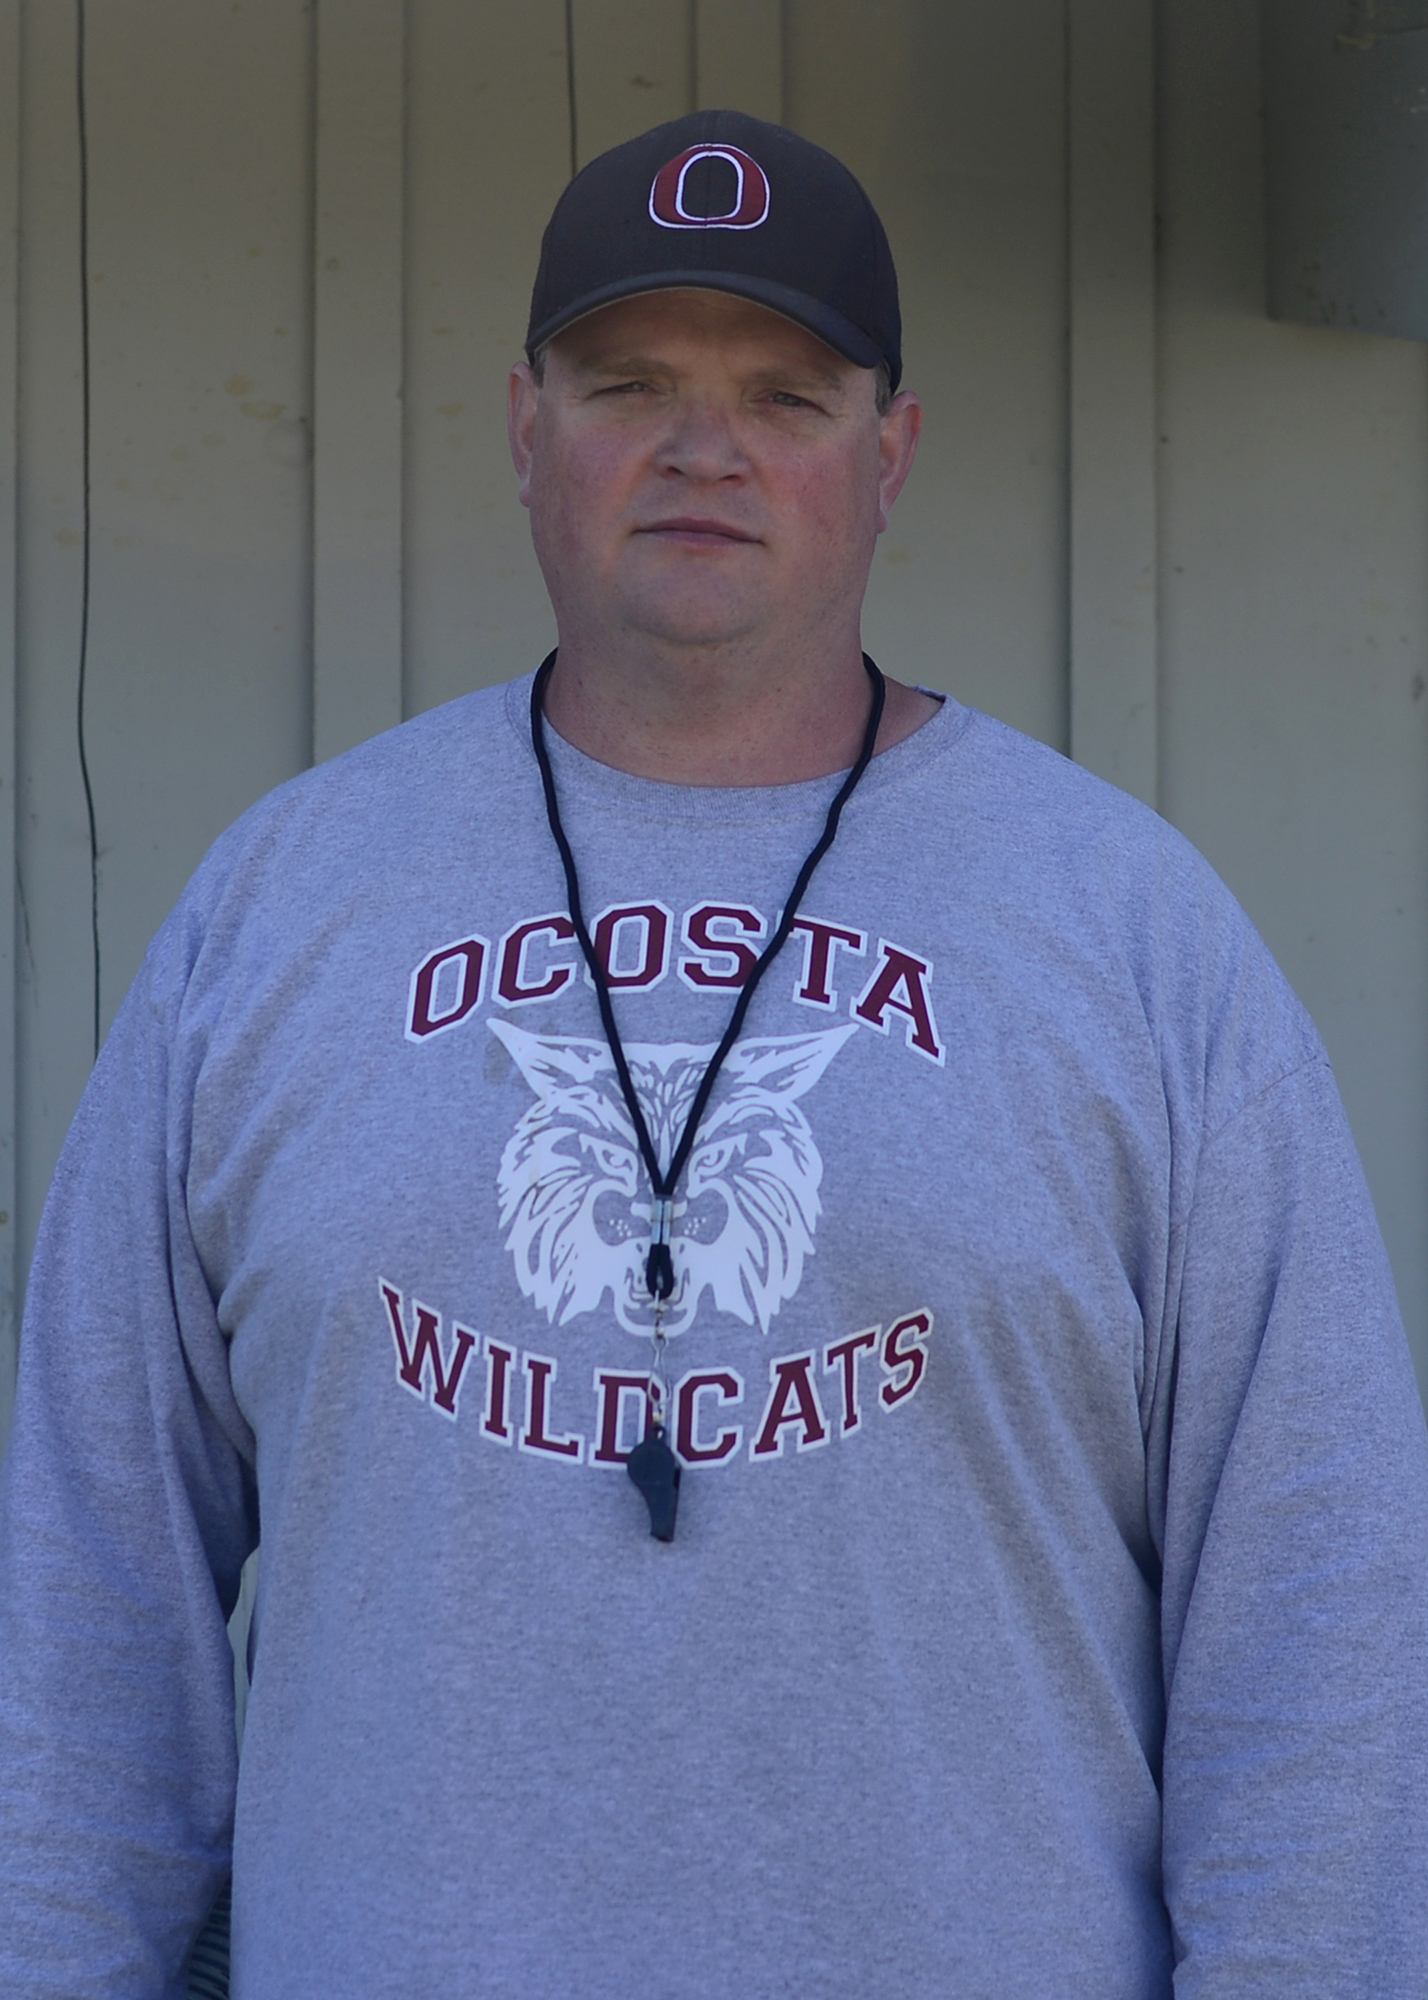 With continuity, expectations are rising for Ocosta